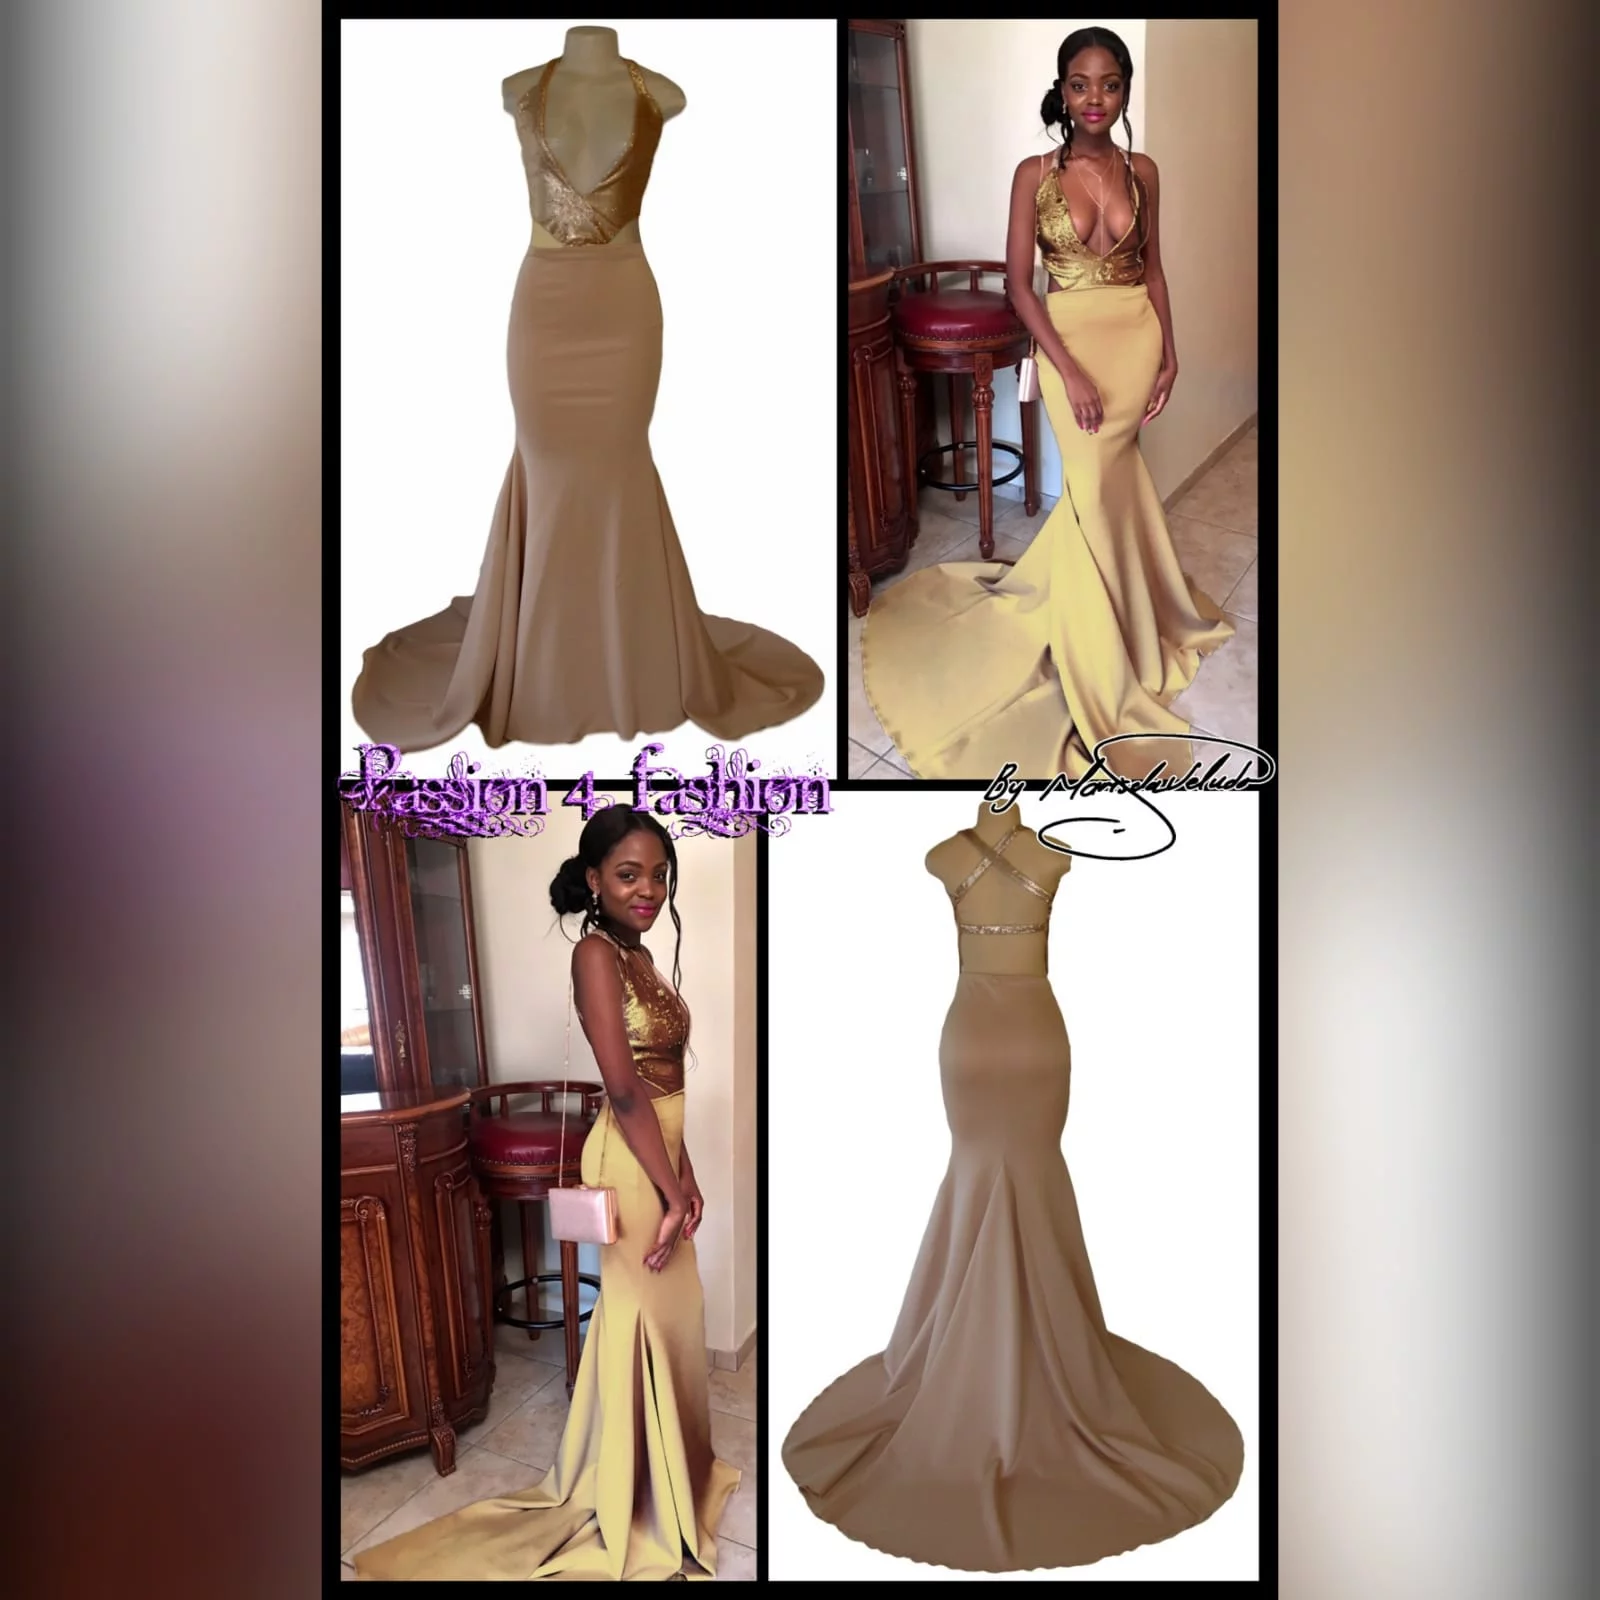 Nude and gold soft mermaid prom dress 5 nude and gold soft mermaid prom dress. Bodice in sequins with a plunging neckline and a naked back detailed with straps. Bottom with a long wide train.